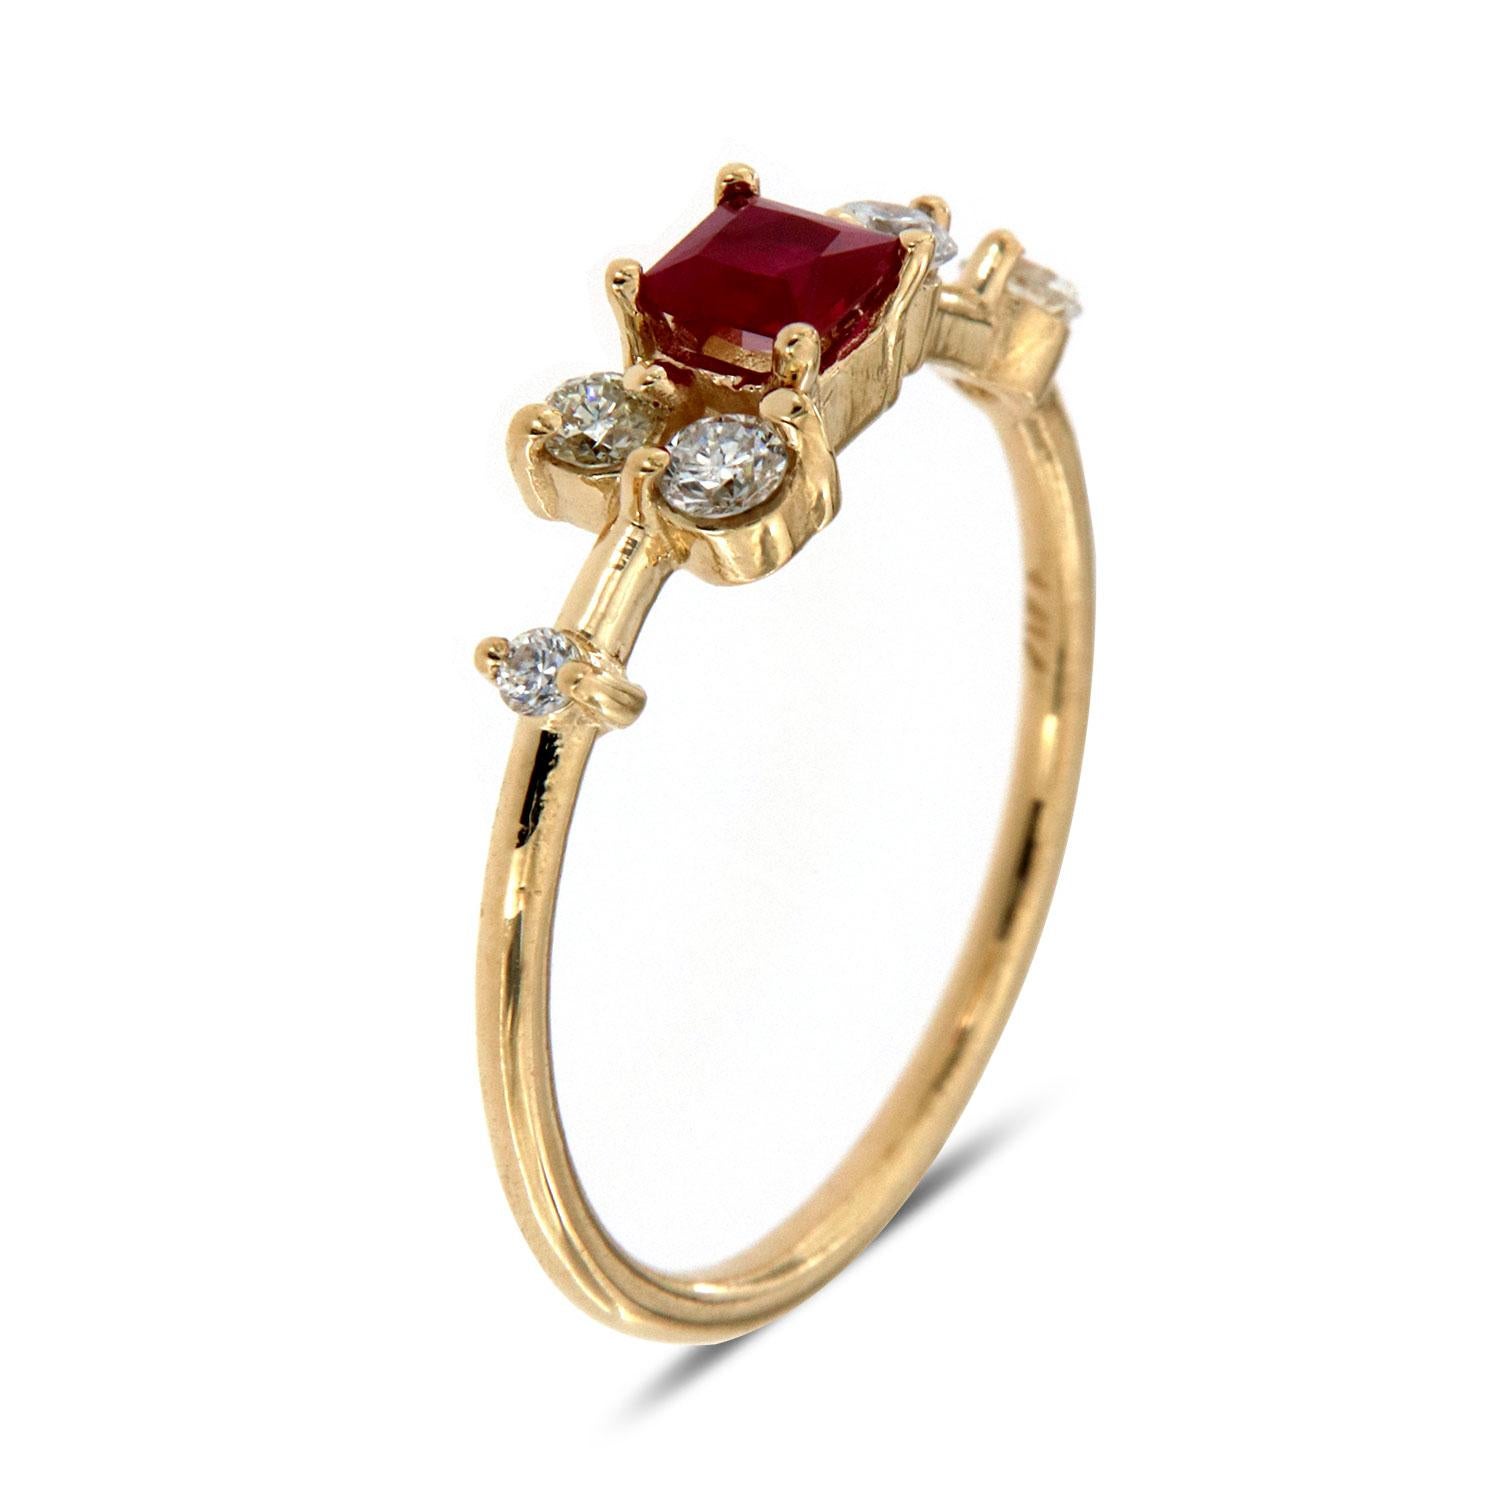 This petite ring features five (5) round brilliant diamonds scattered on top of a delicate 1.2 mm band. A perfectly square 0.27 Red Ruby is placed in the center of this organically designed ring band. Experience the difference in person!

Product